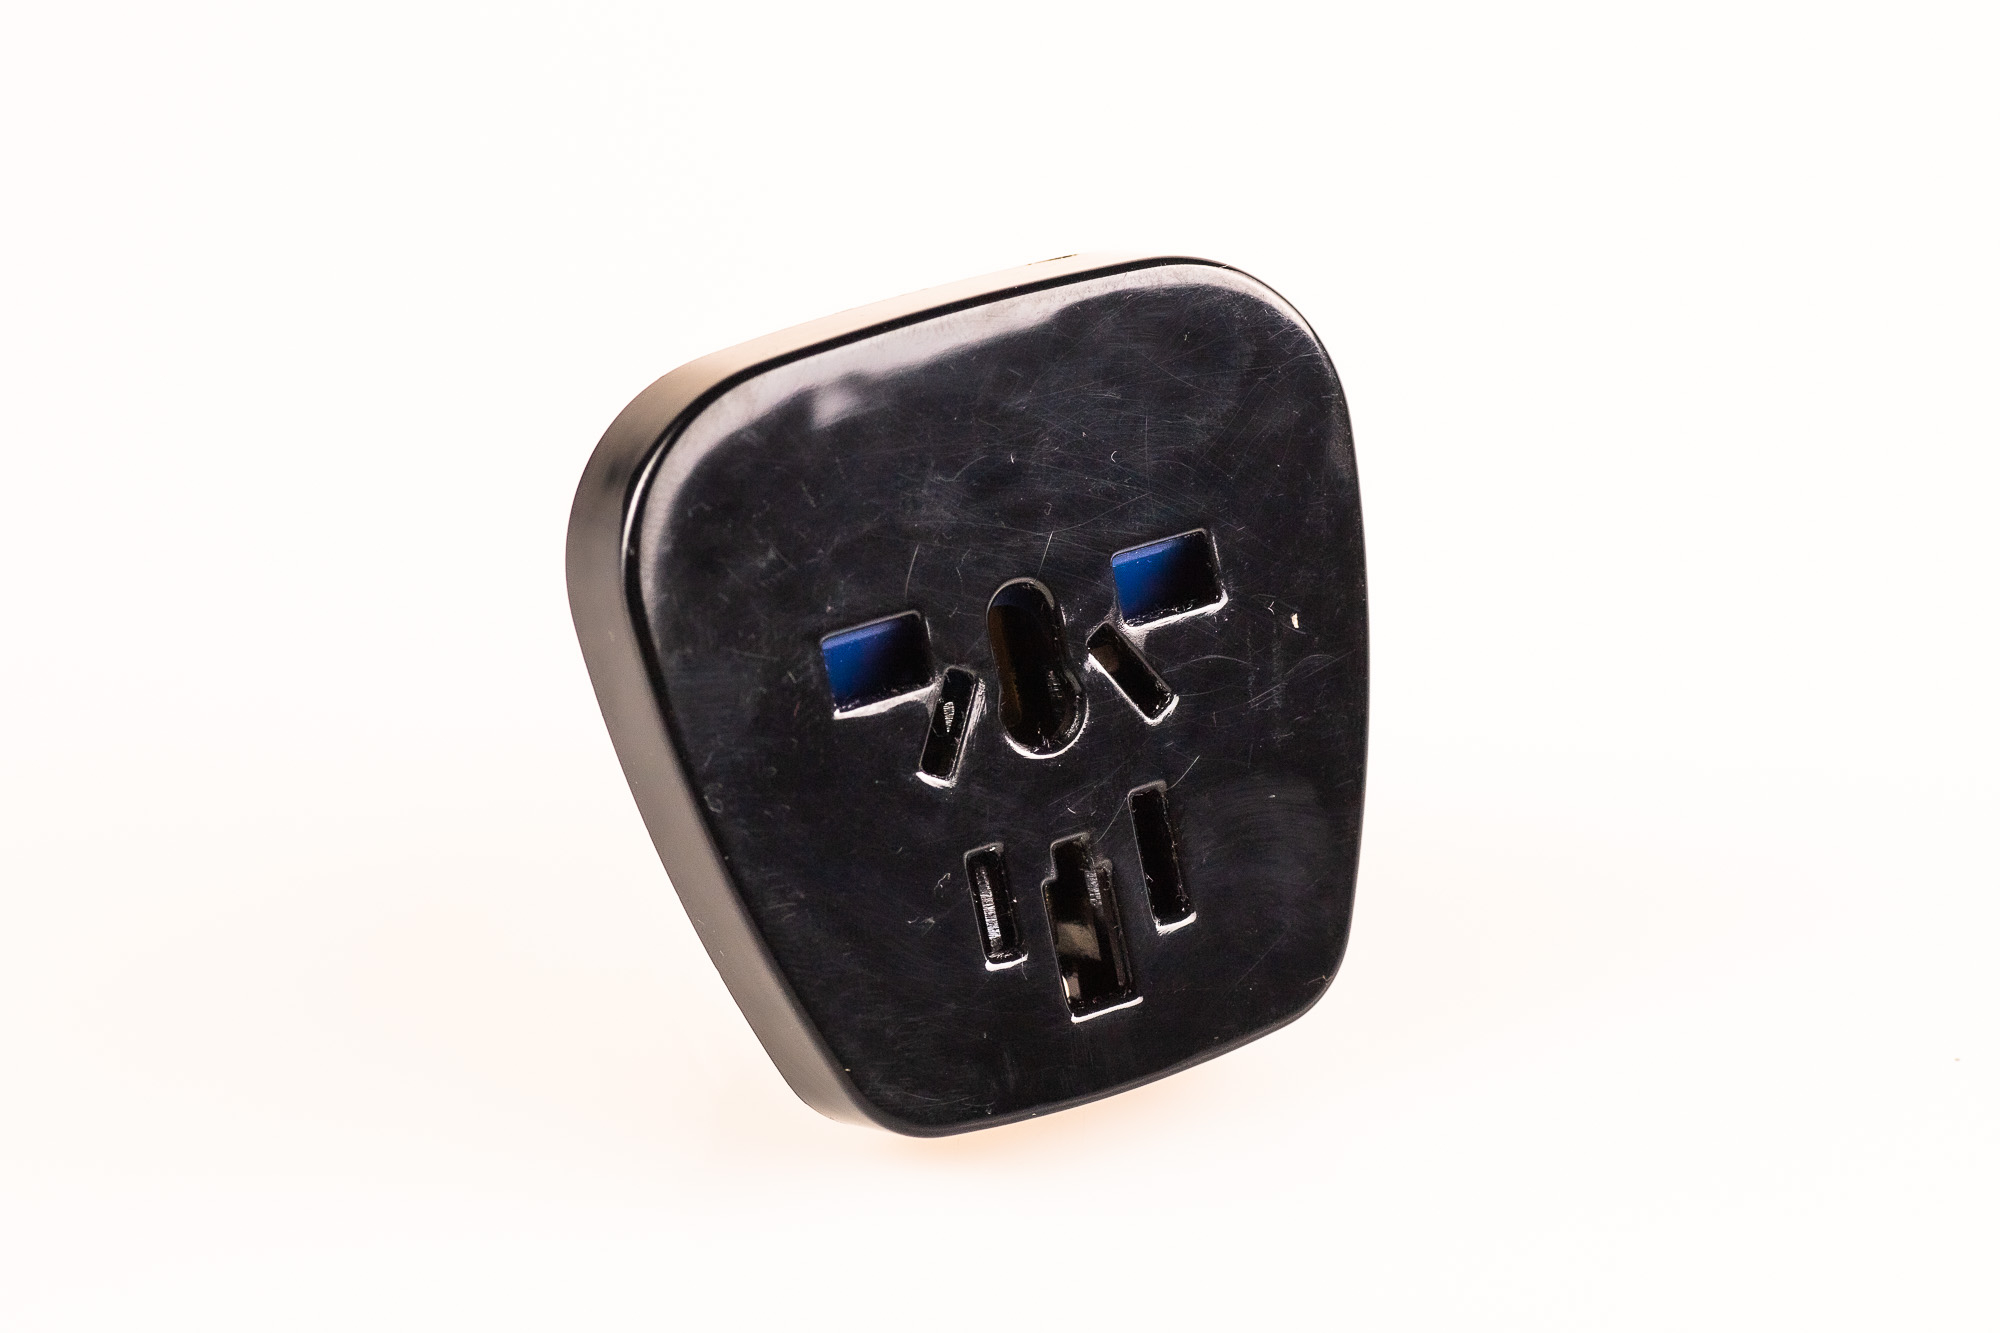 Solight Travel adapter for foreigners in Slovakia - universal black